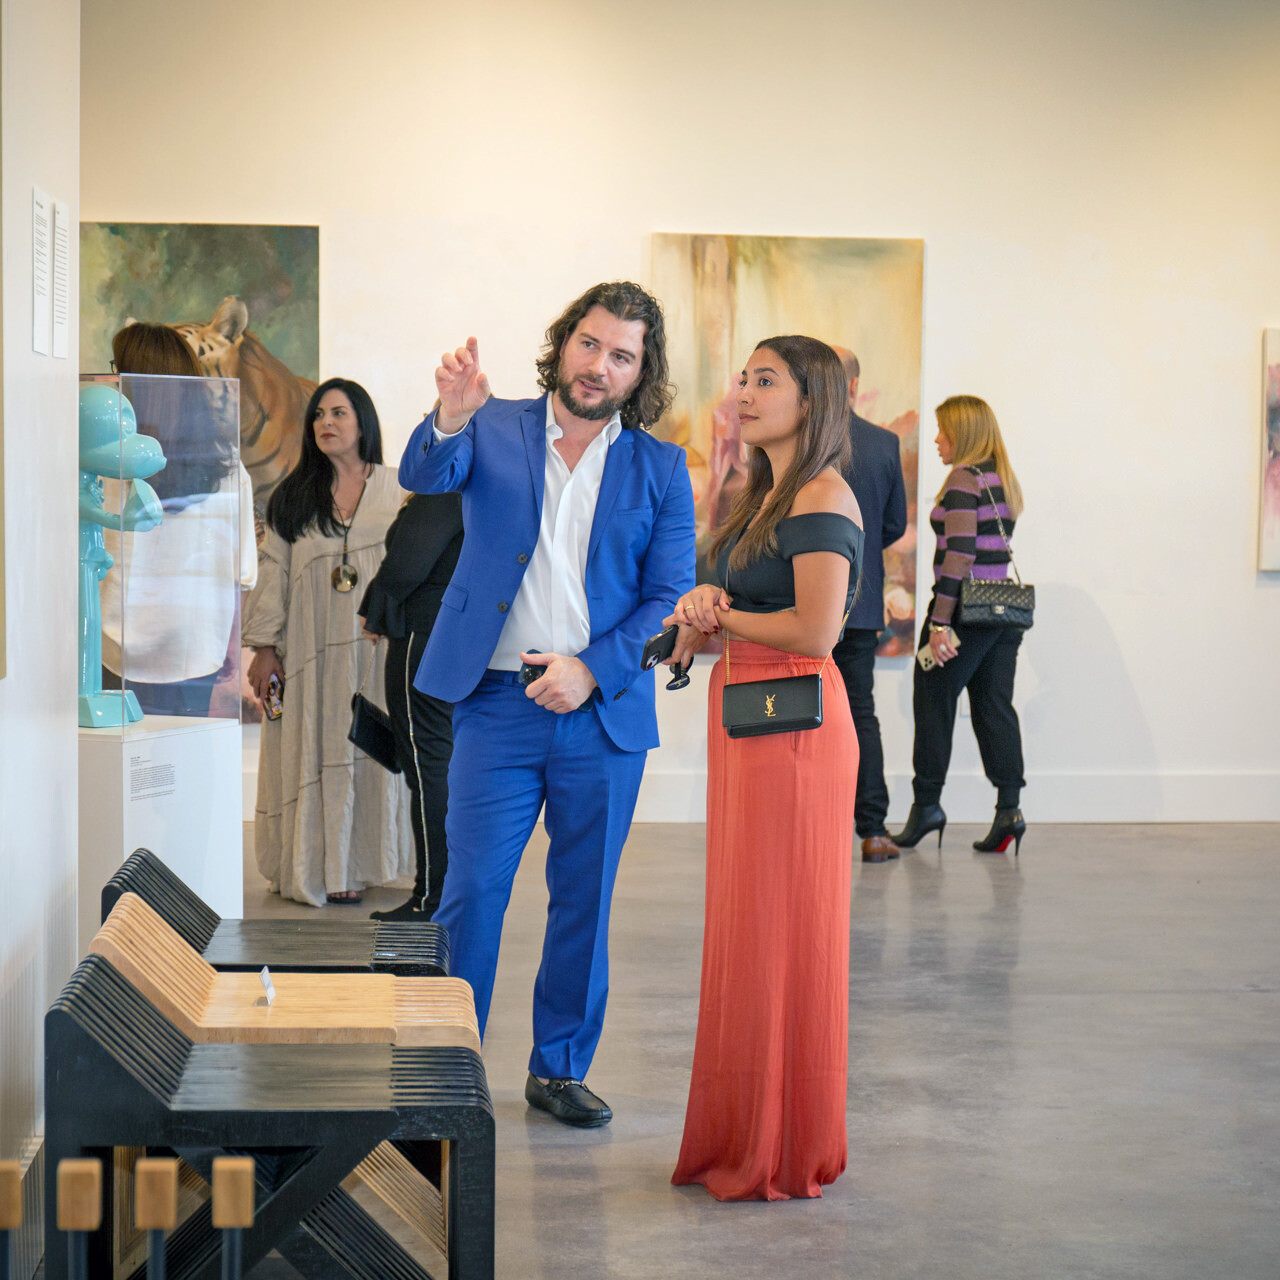 Artist Alex Righetto showing a painting titled 'Mona Lisa's Daughter' to an art collector in a gallery setting